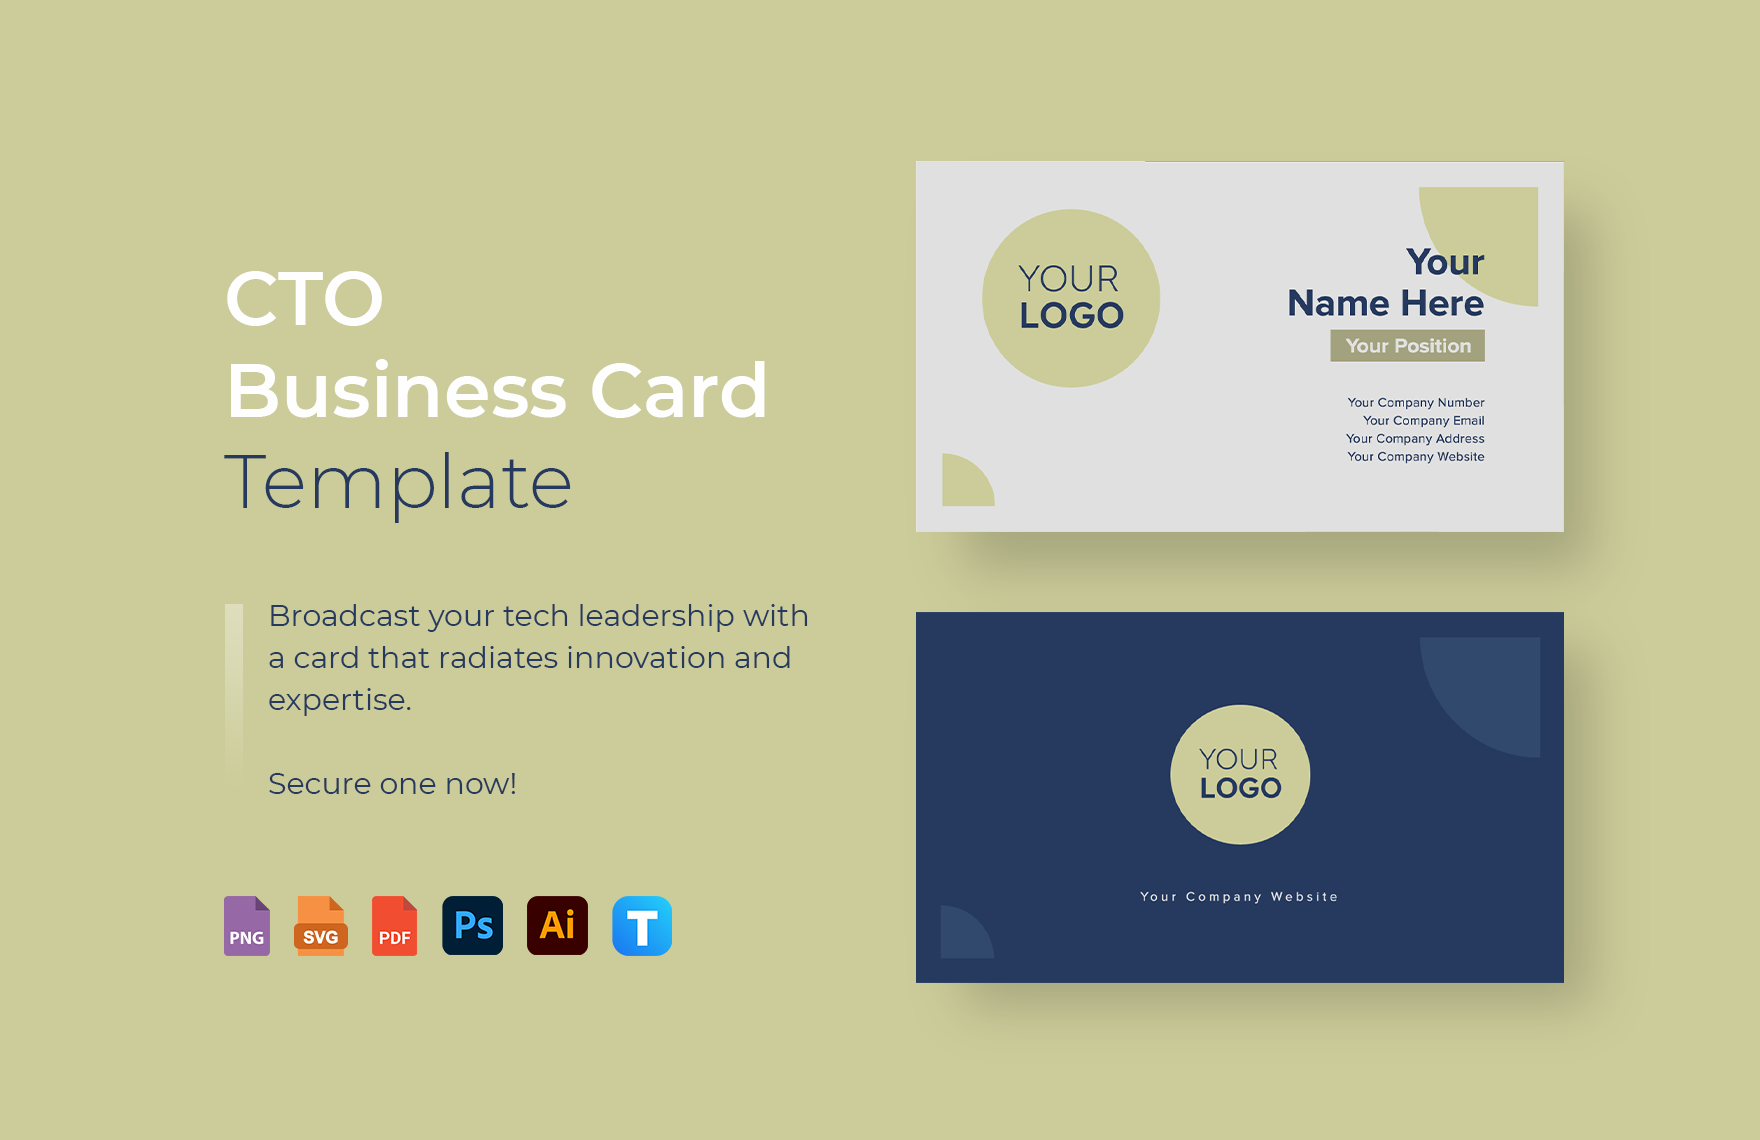 CTO Business Card Template